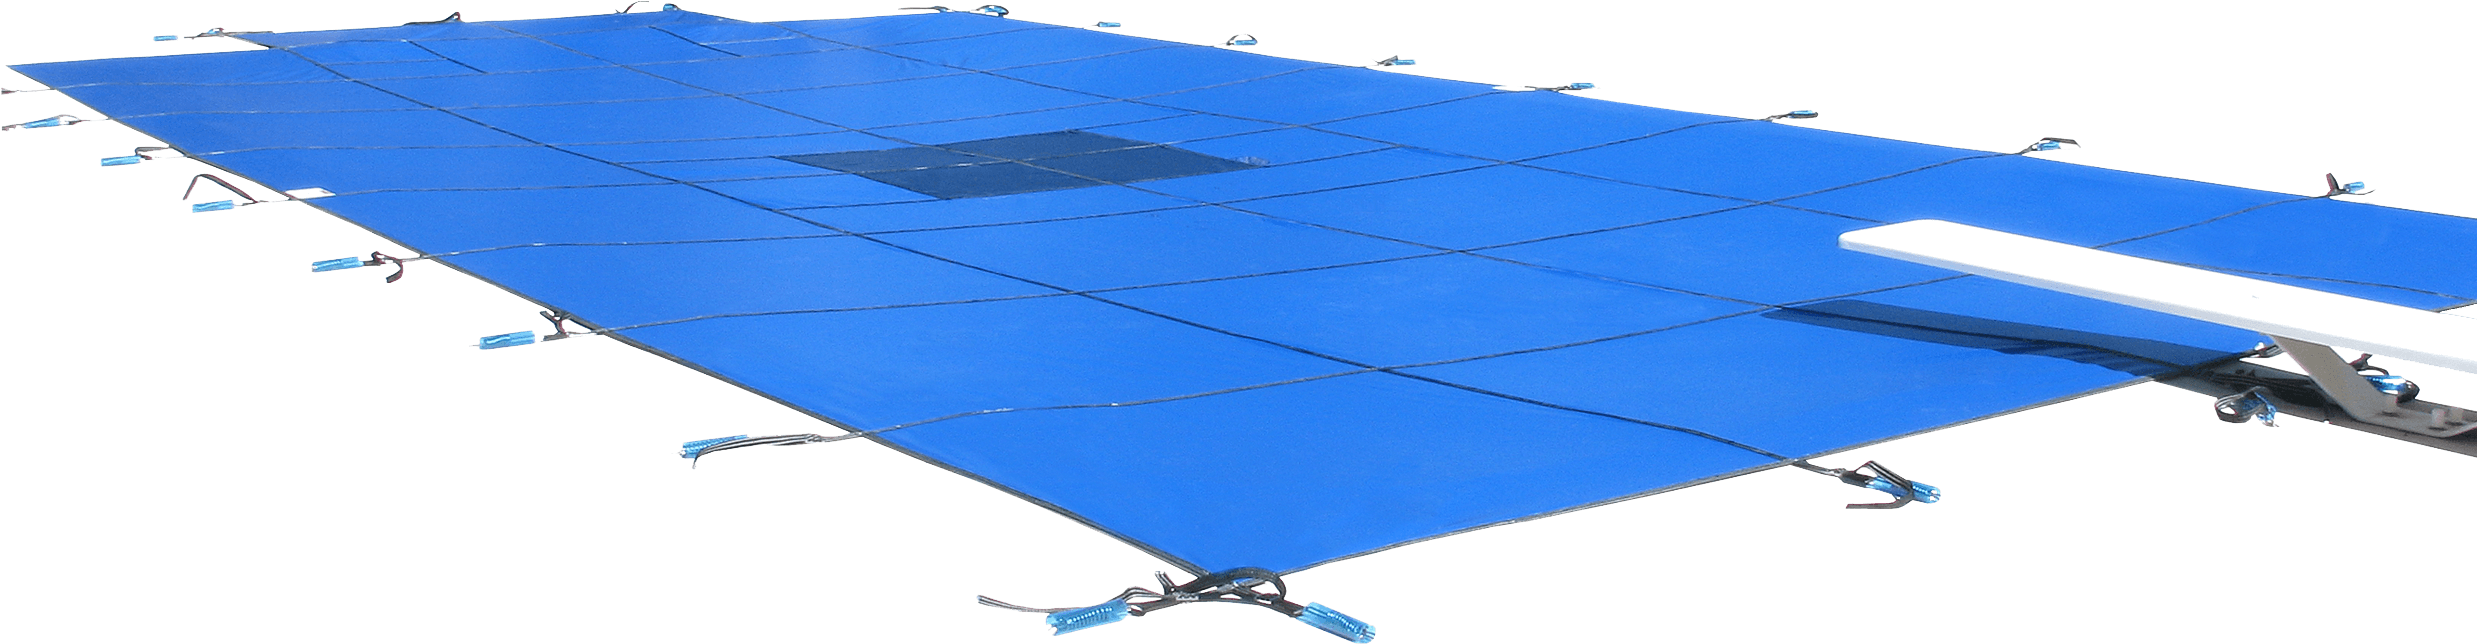 Inground Swimming Cover Installation - Roof (2493x971)